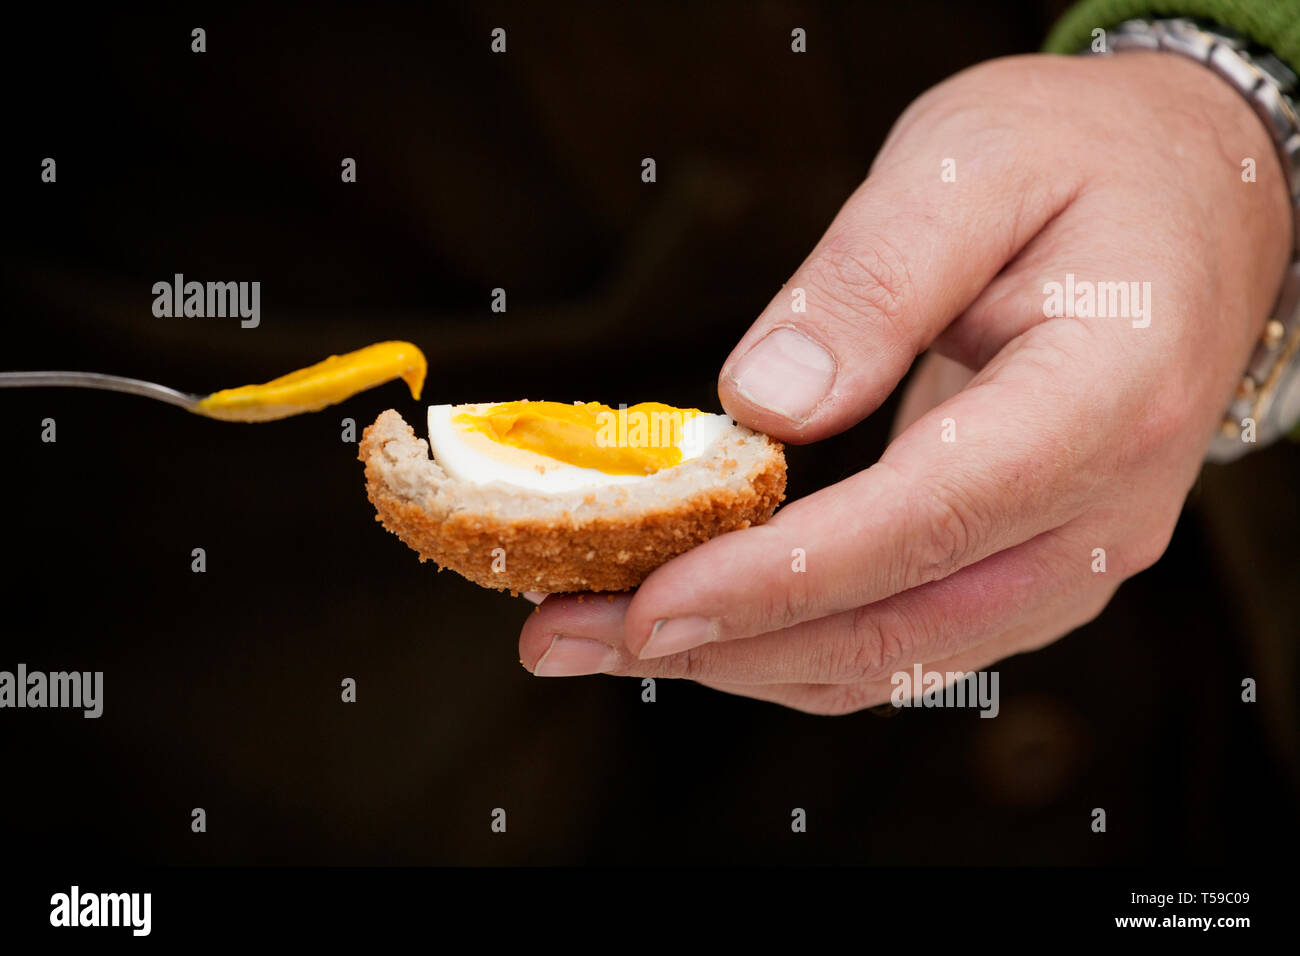 A man applying mustard to a section of a Scotch egg at lunchtime. England UK GB Stock Photo